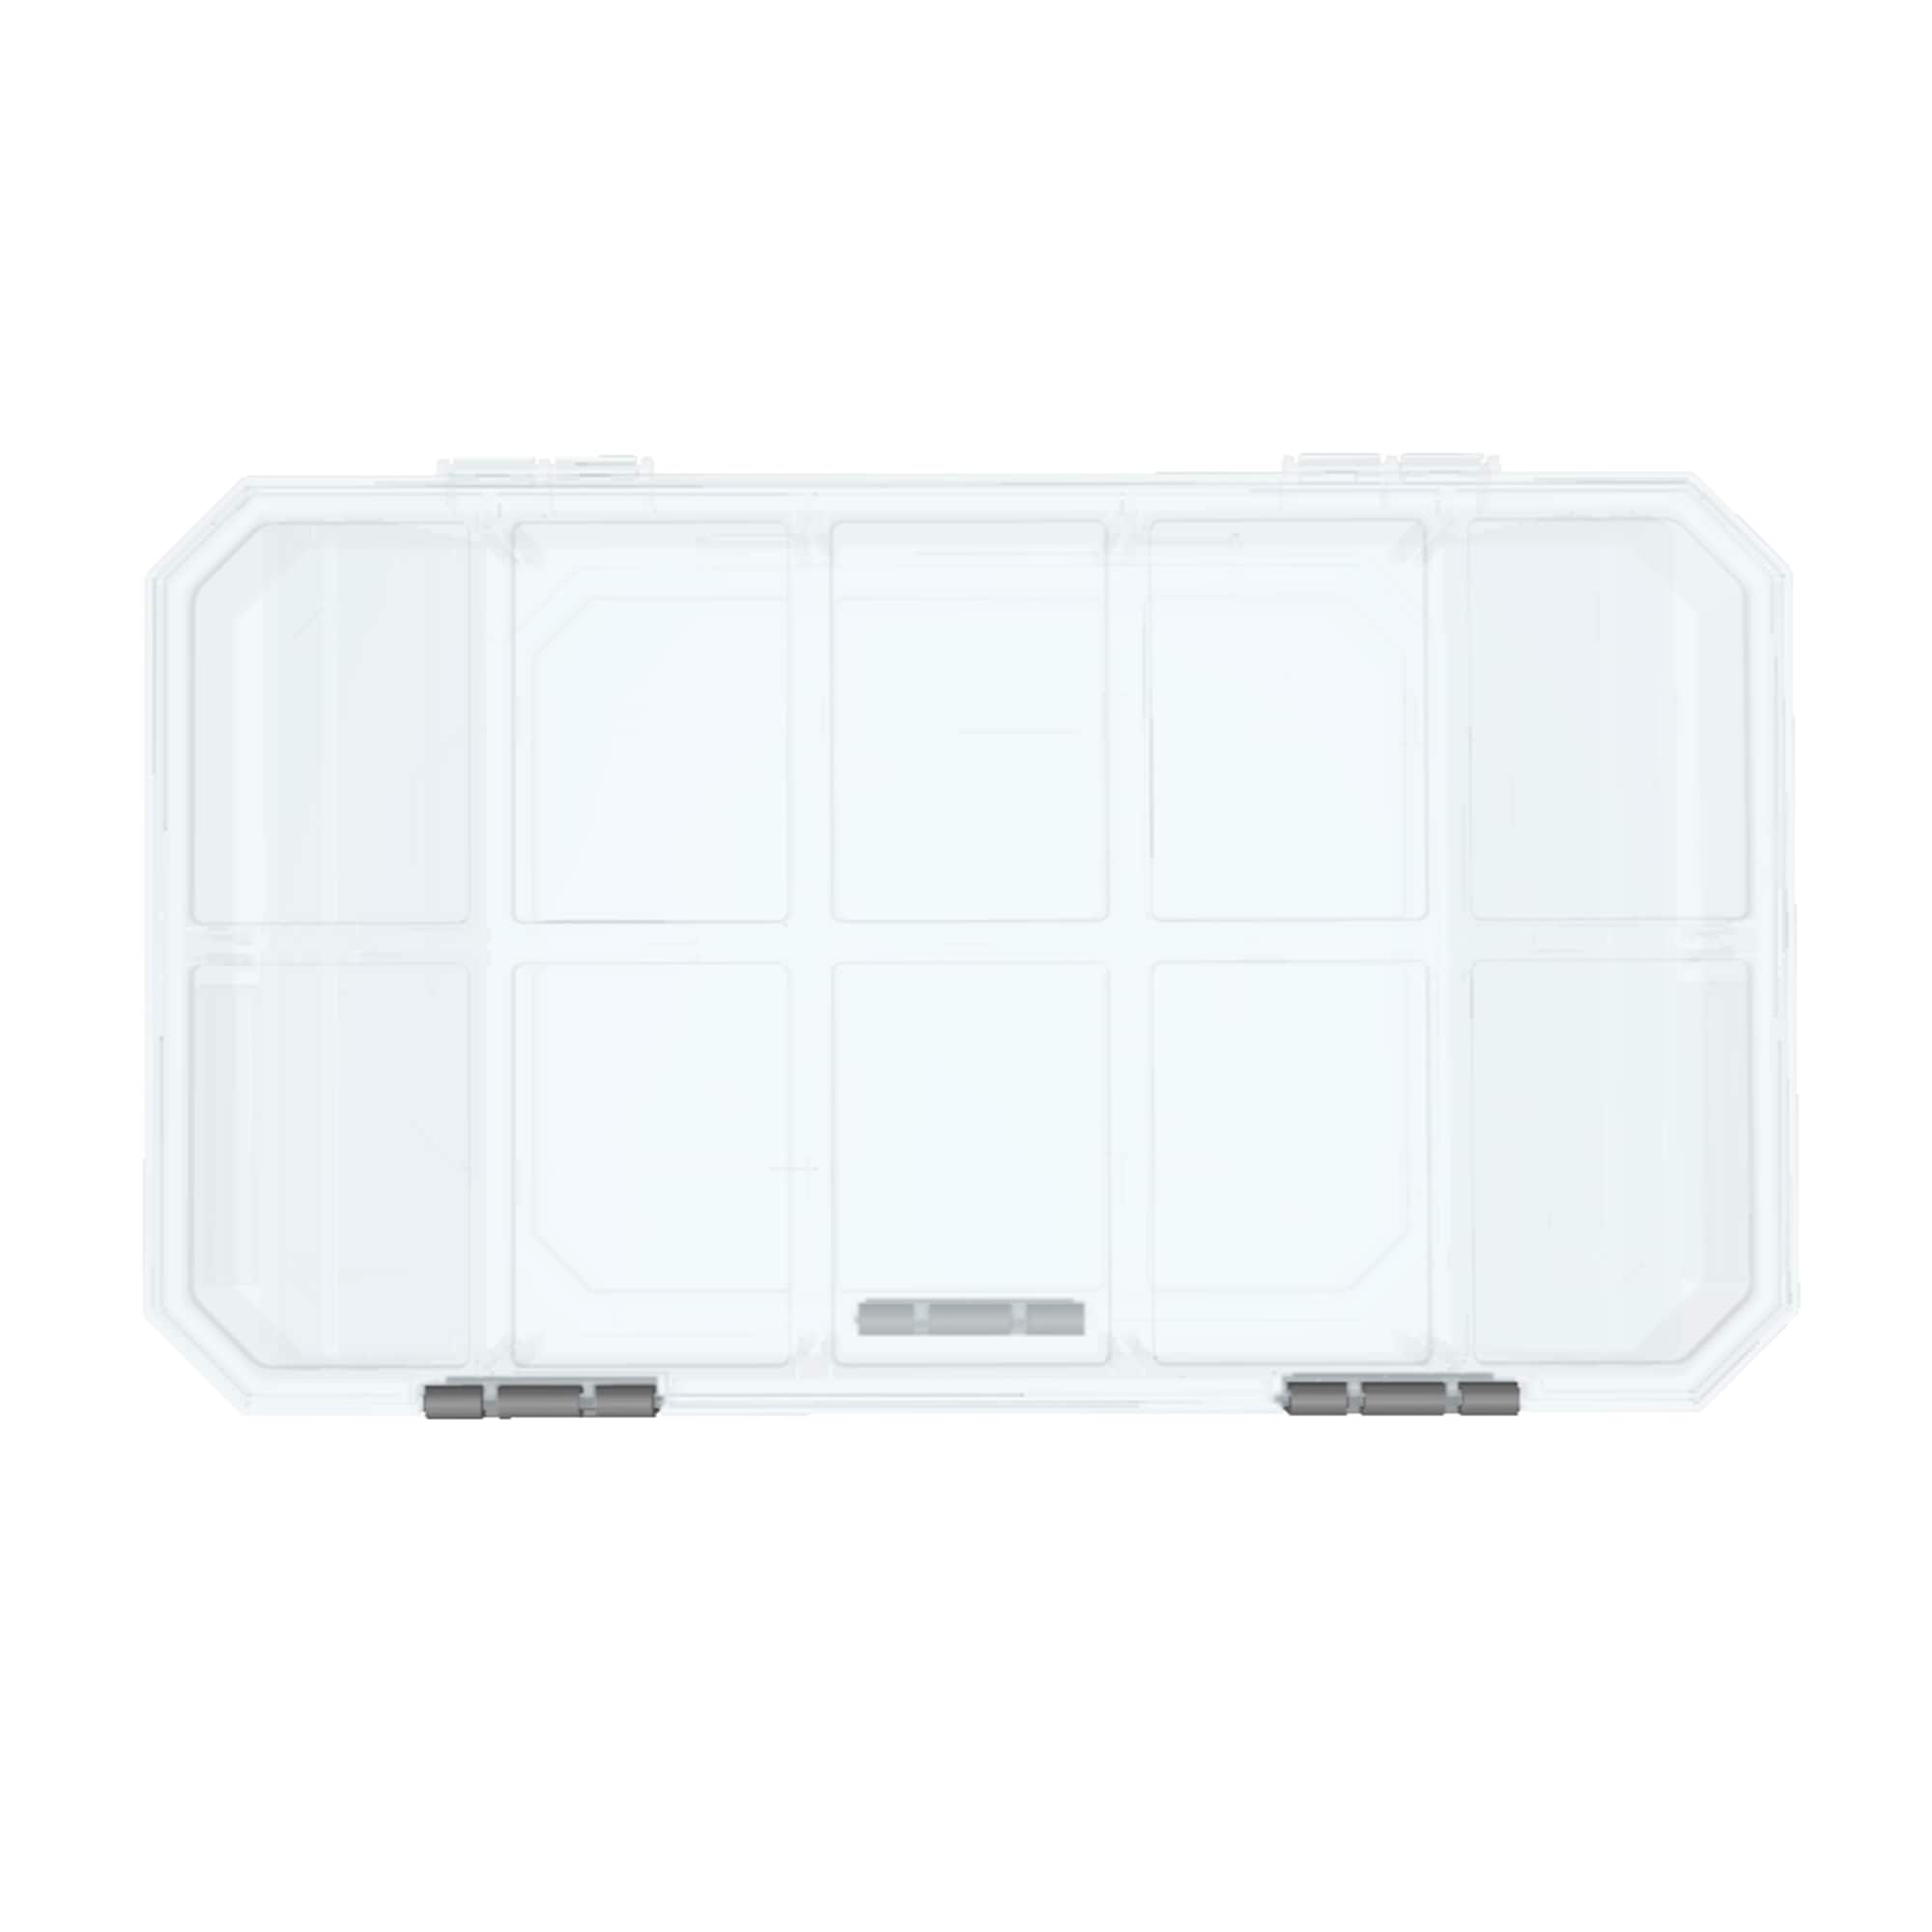 Craftsman 2-Pack 14-Compartment Plastic Small Parts Organizers | CMST60944M